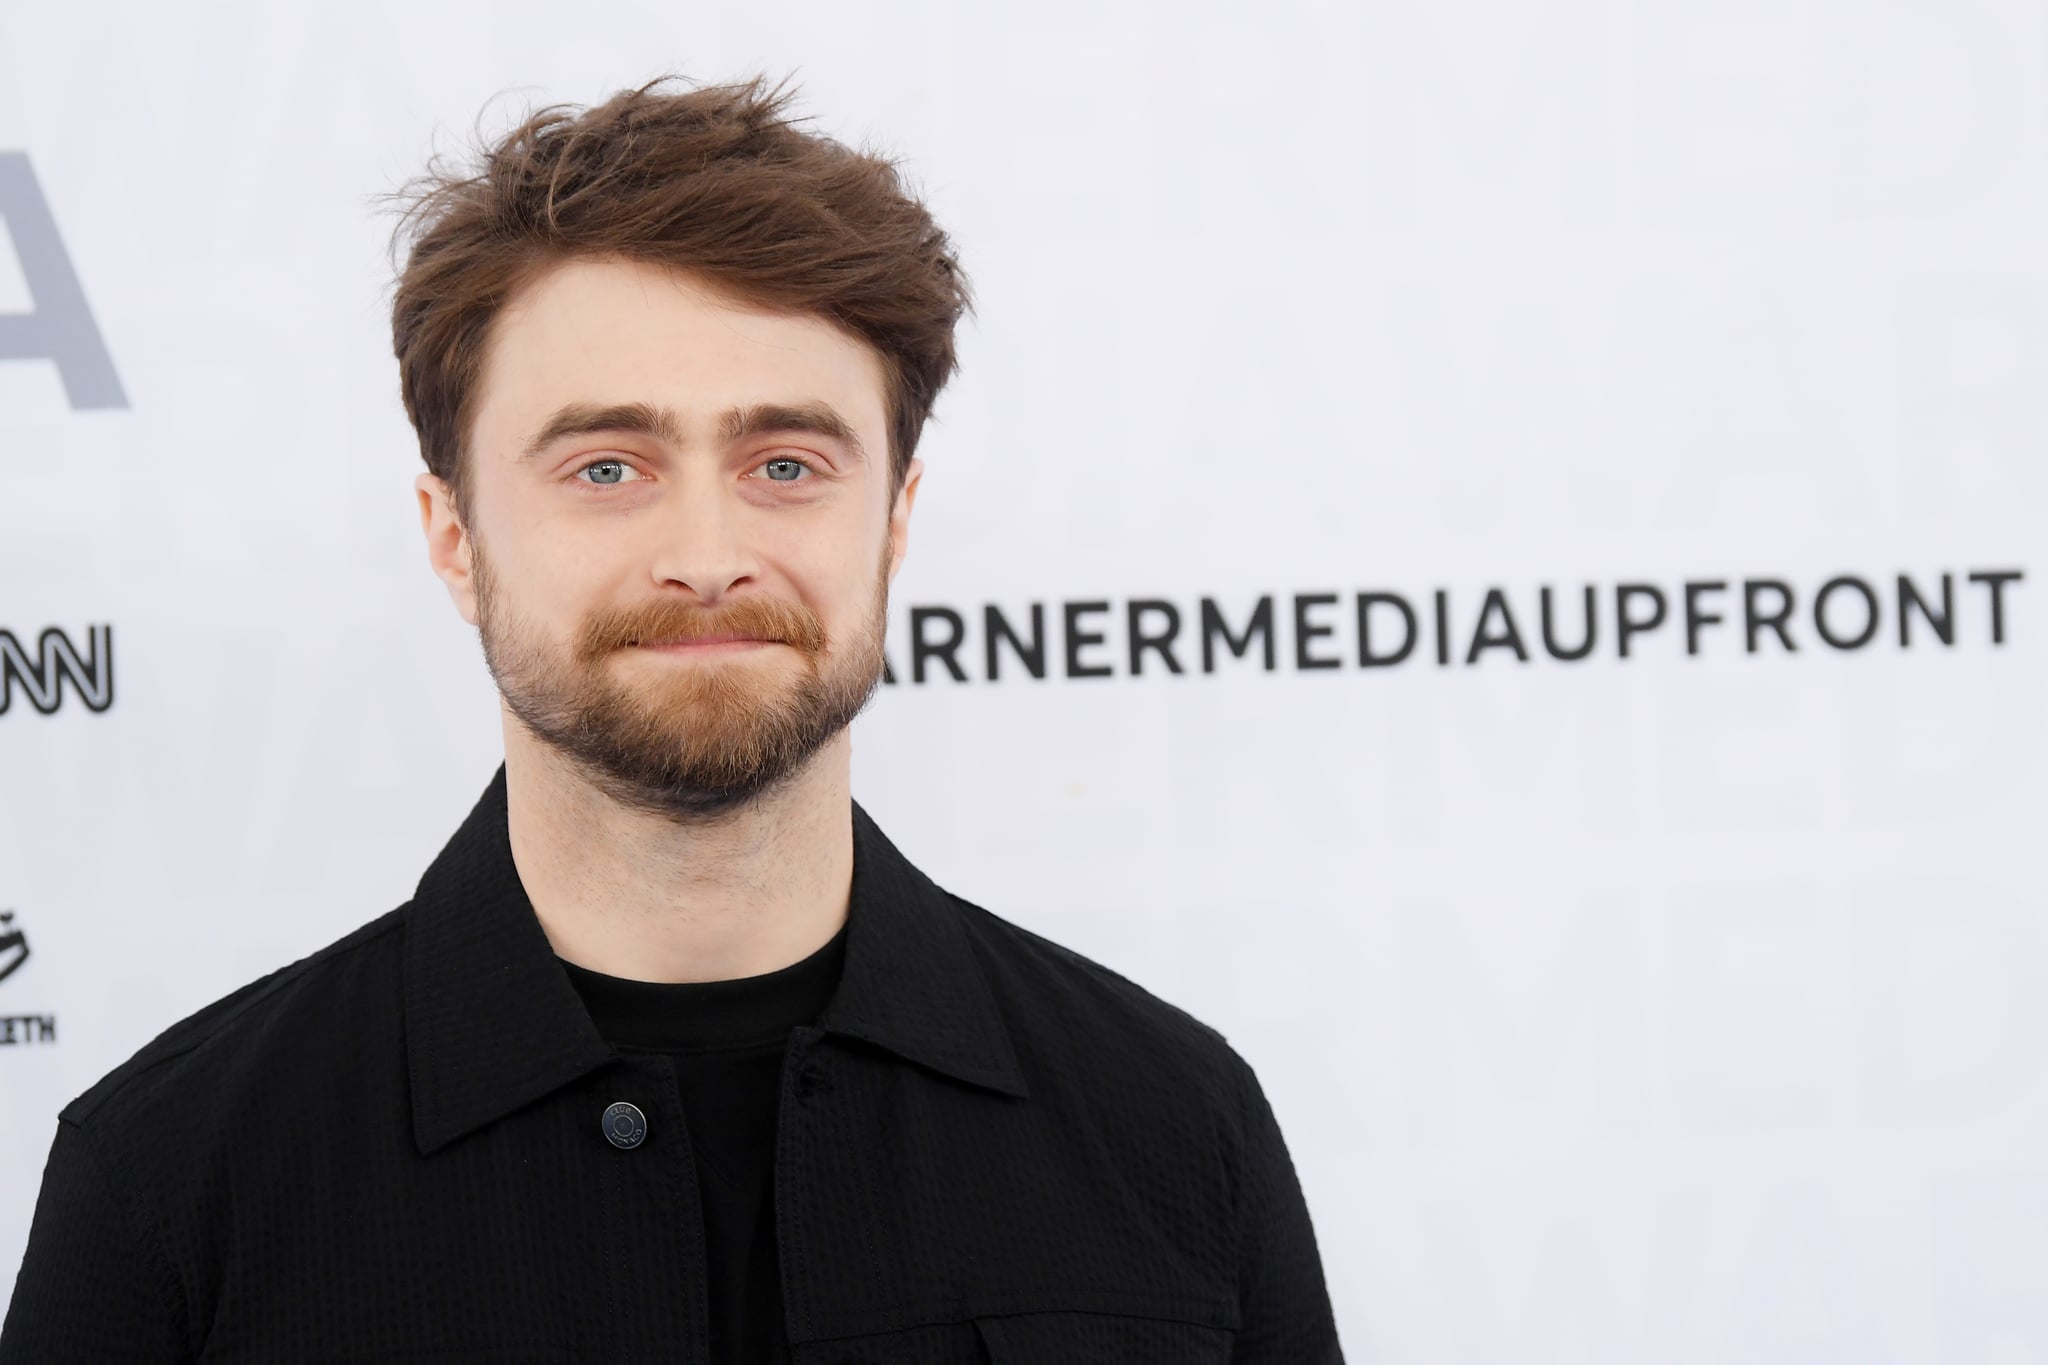 NEW YORK, NEW YORK - MAY 15: Daniel Radcliffe of TBS's Miracle Workers attends the WarnerMedia Upfront 2019 arrivals on the red carpet at The Theater at Madison Square Garden on May 15, 2019 in New York City. 602140 (Photo by Dimitrios Kambouris/Getty Images for WarnerMedia)